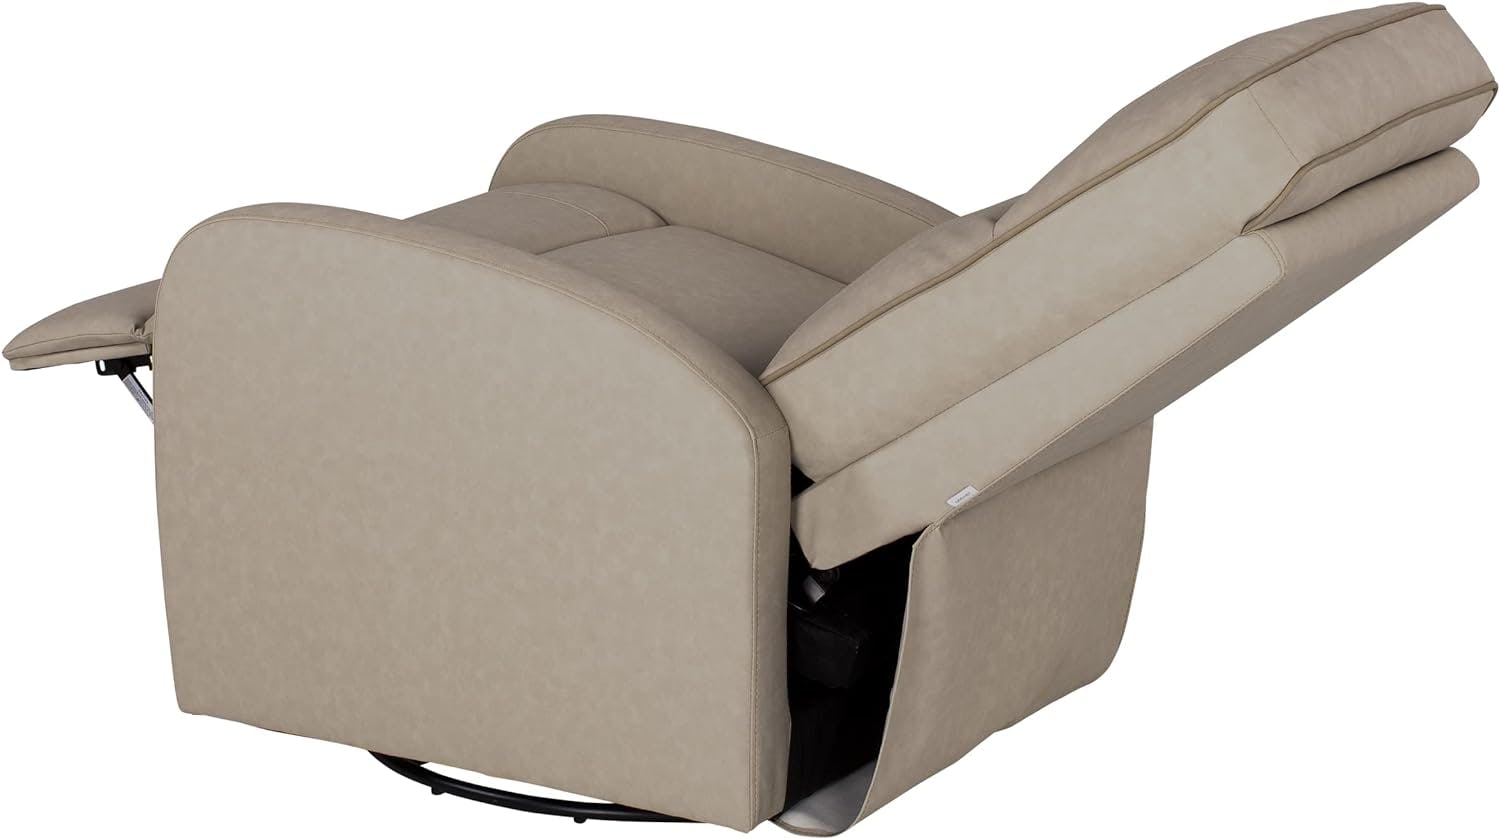 Beige Leather Swivel Pushback Recliner Armchair